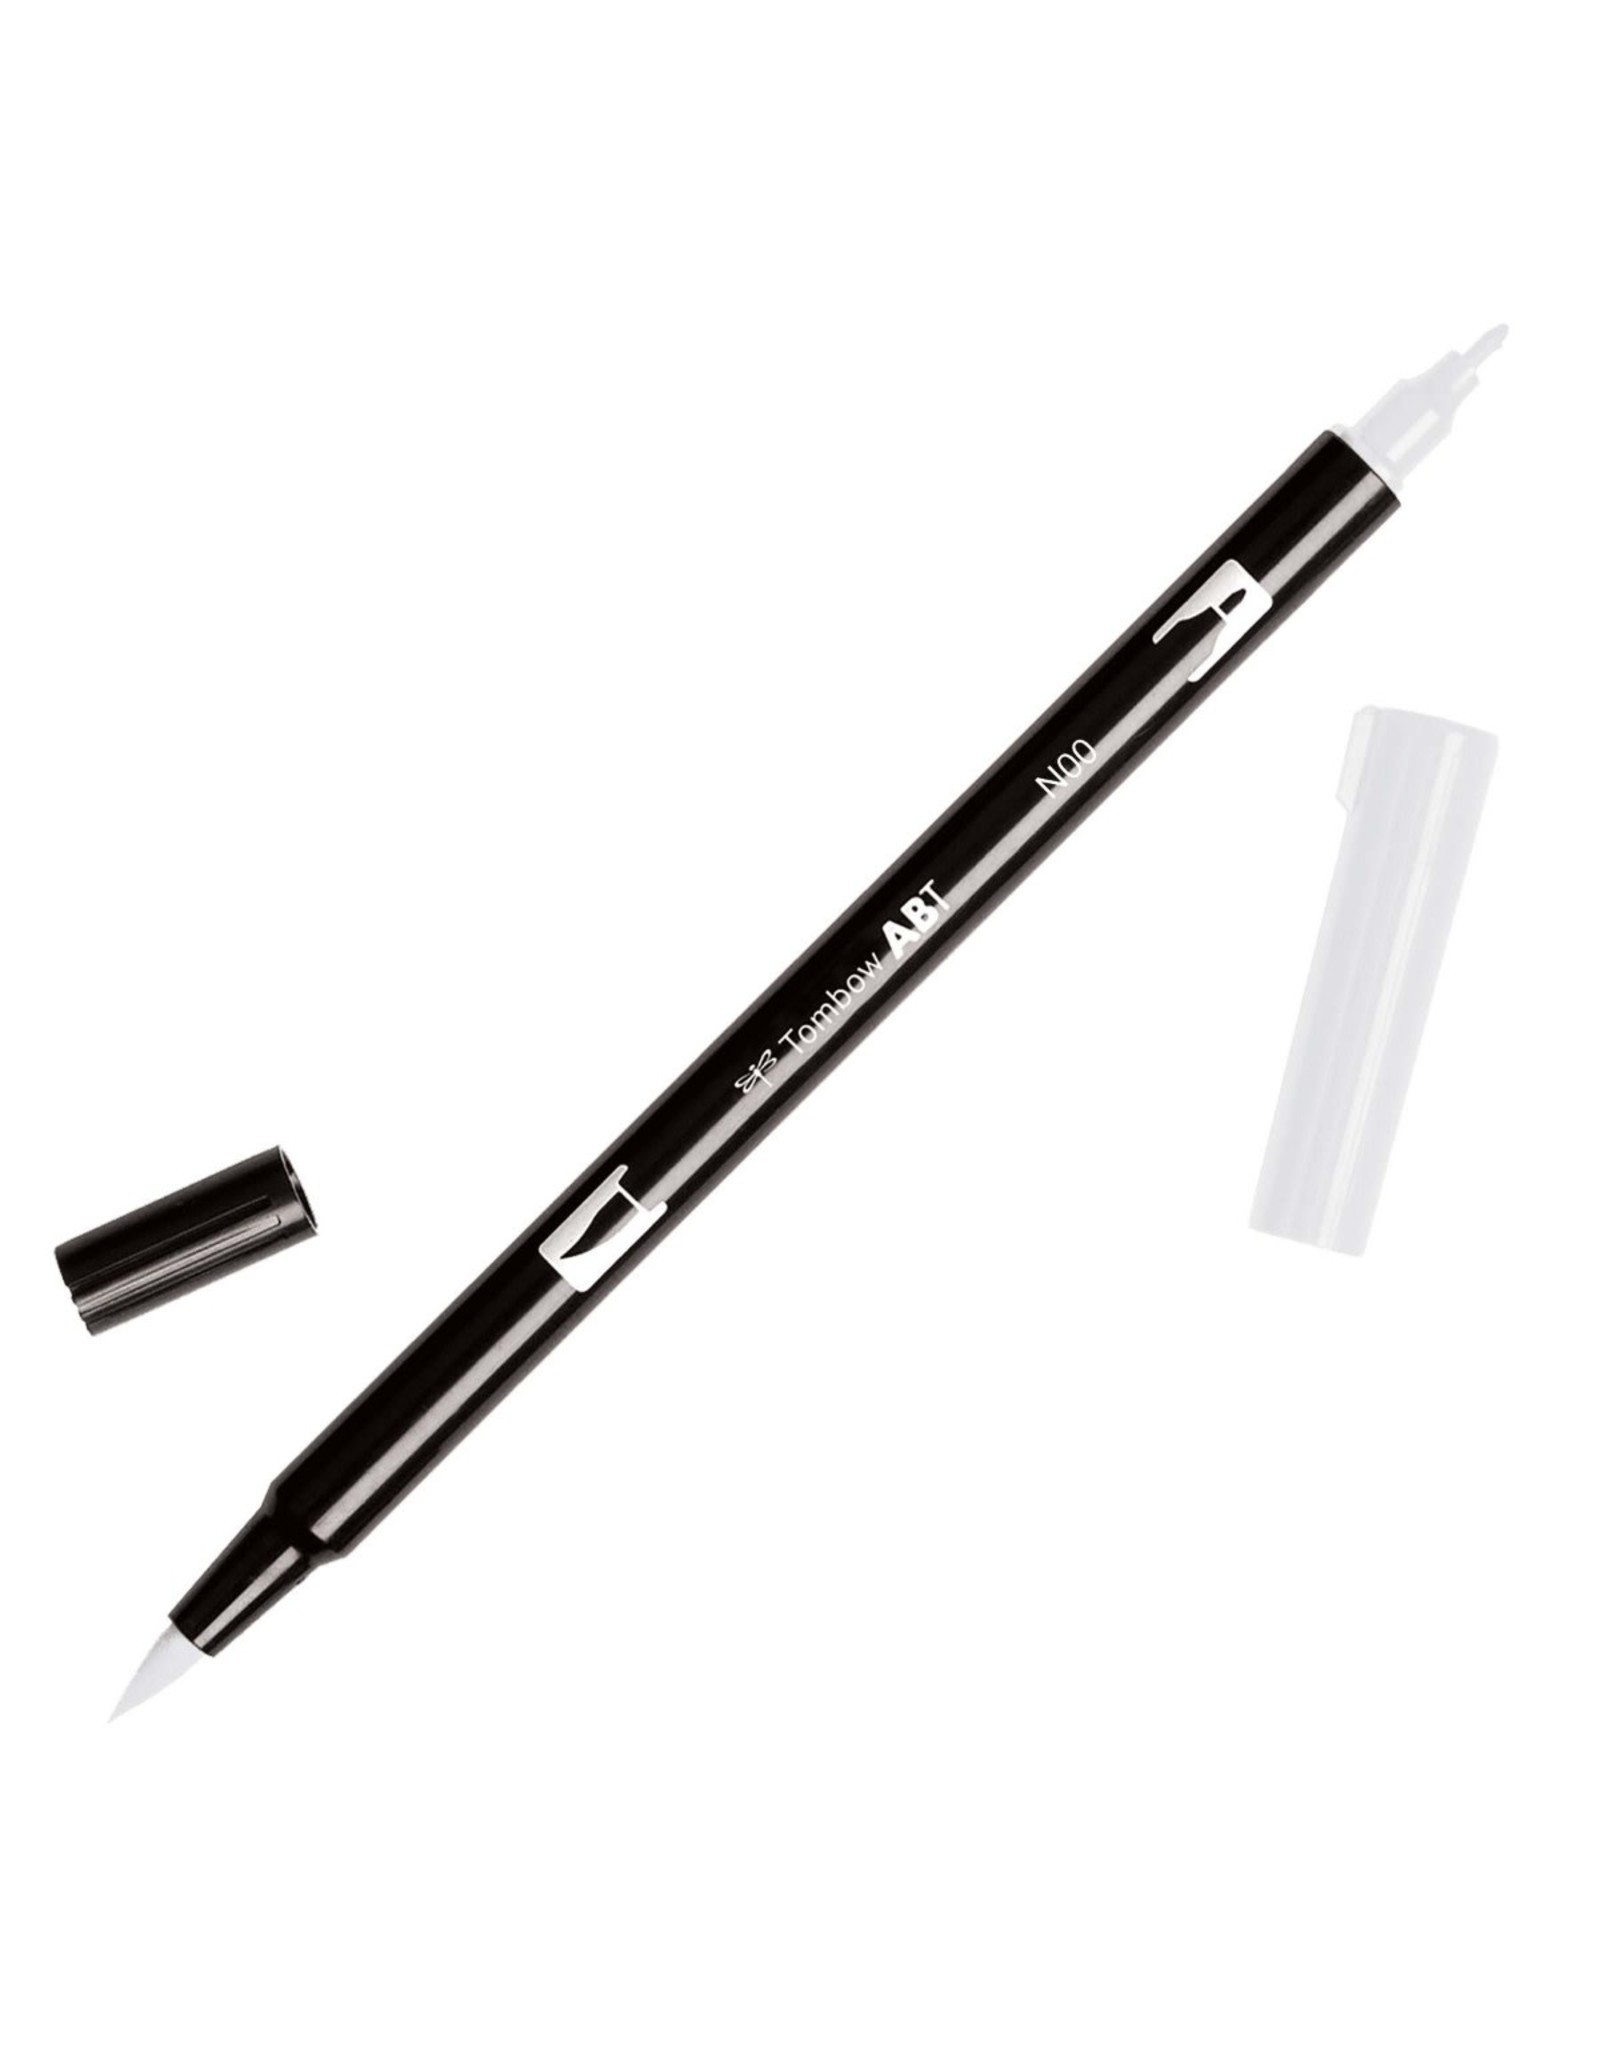 TOMBOW TOMBOW ABT-N00 COLORLESS BLENDER DUAL BRUSH MARKER